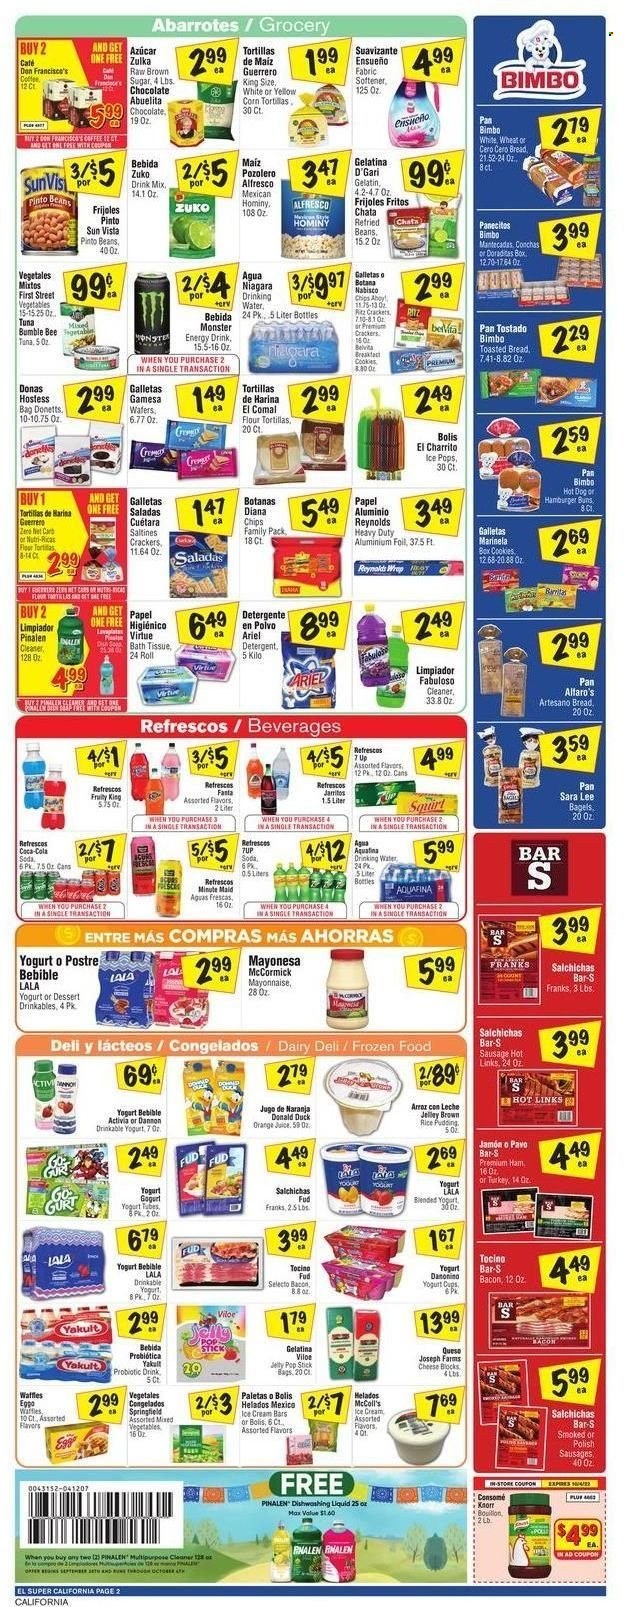 thumbnail - El Super Flyer - 09/28/2022 - 10/04/2022 - Sales products - bagels, corn tortillas, tortillas, buns, burger buns, tostadas, Sara Lee, flour tortillas, waffles, tuna, hot dog, Bumble Bee, ham, sausage, cheese, Activia, Dannon, rice pudding, eggs, ice cream, ice cream bars, cookies, wafers, jelly, crackers, Chips Ahoy!, RITZ, Fritos, saltines, cane sugar, refried beans, pinto beans, belVita, brown rice, Coca-Cola, orange juice, juice, Fanta, energy drink, Monster, 7UP, Monster Energy, fruit punch, Aquafina, soda, coffee. Page 2.